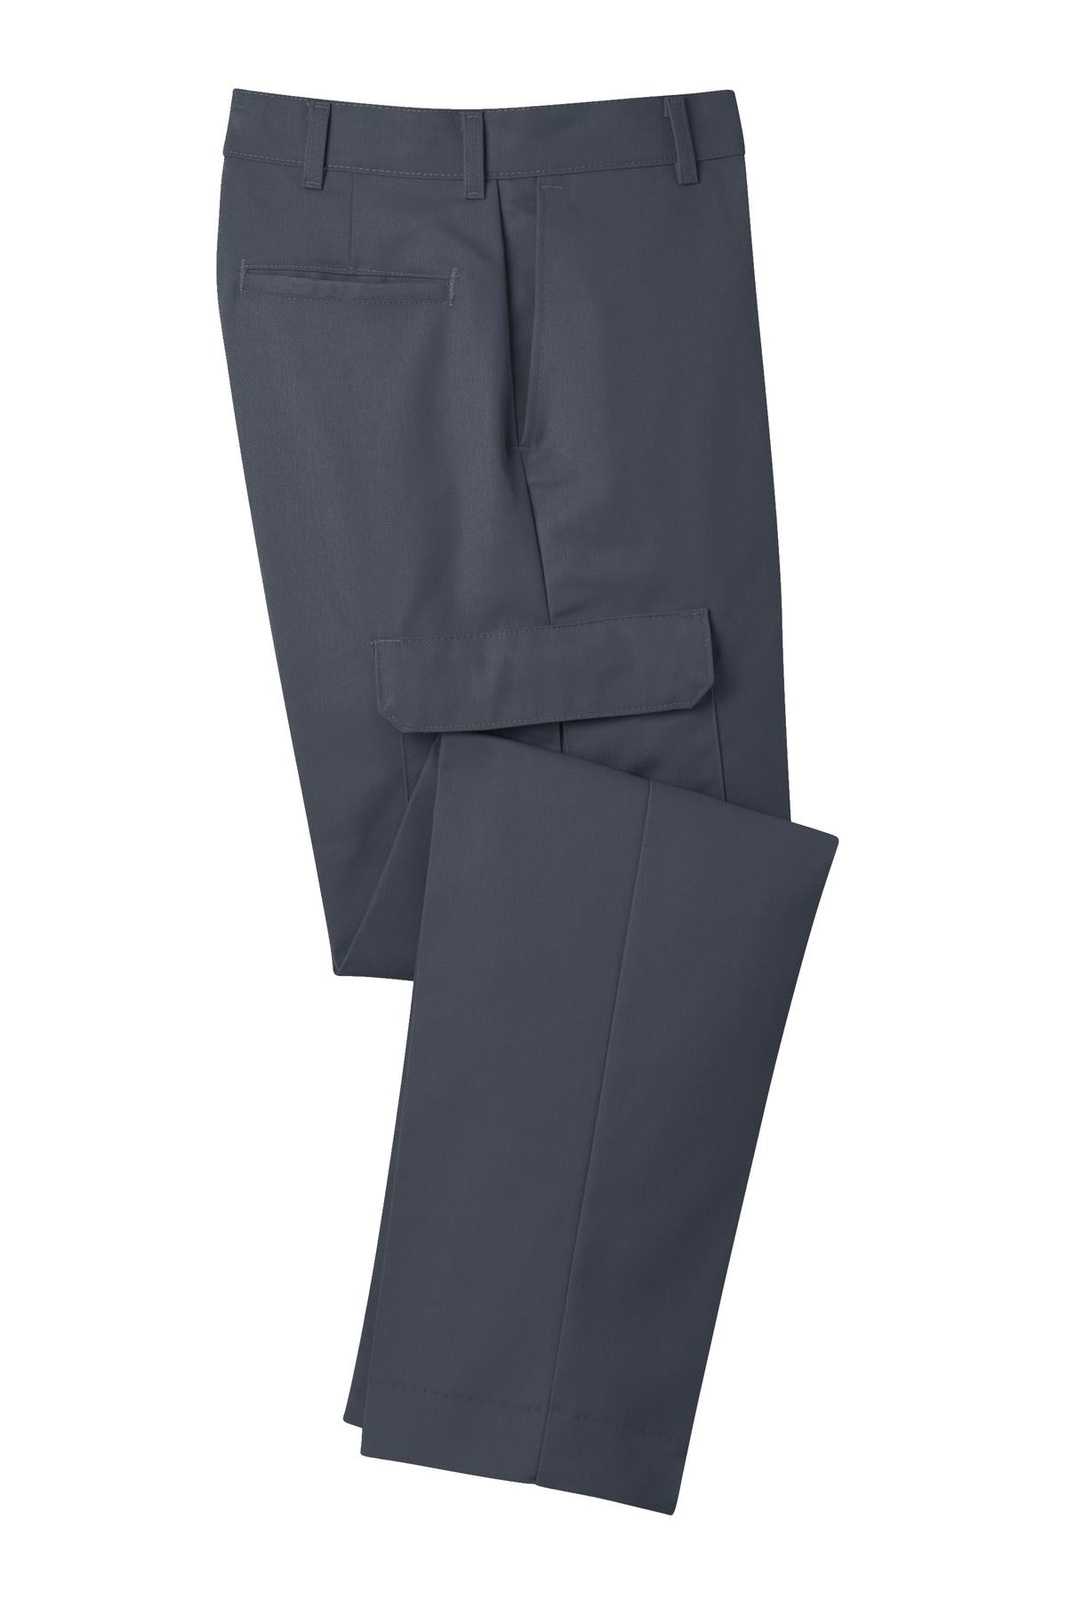 Red Kap PT88 Industrial Cargo Pant - Charcoal - HIT a Double - 3